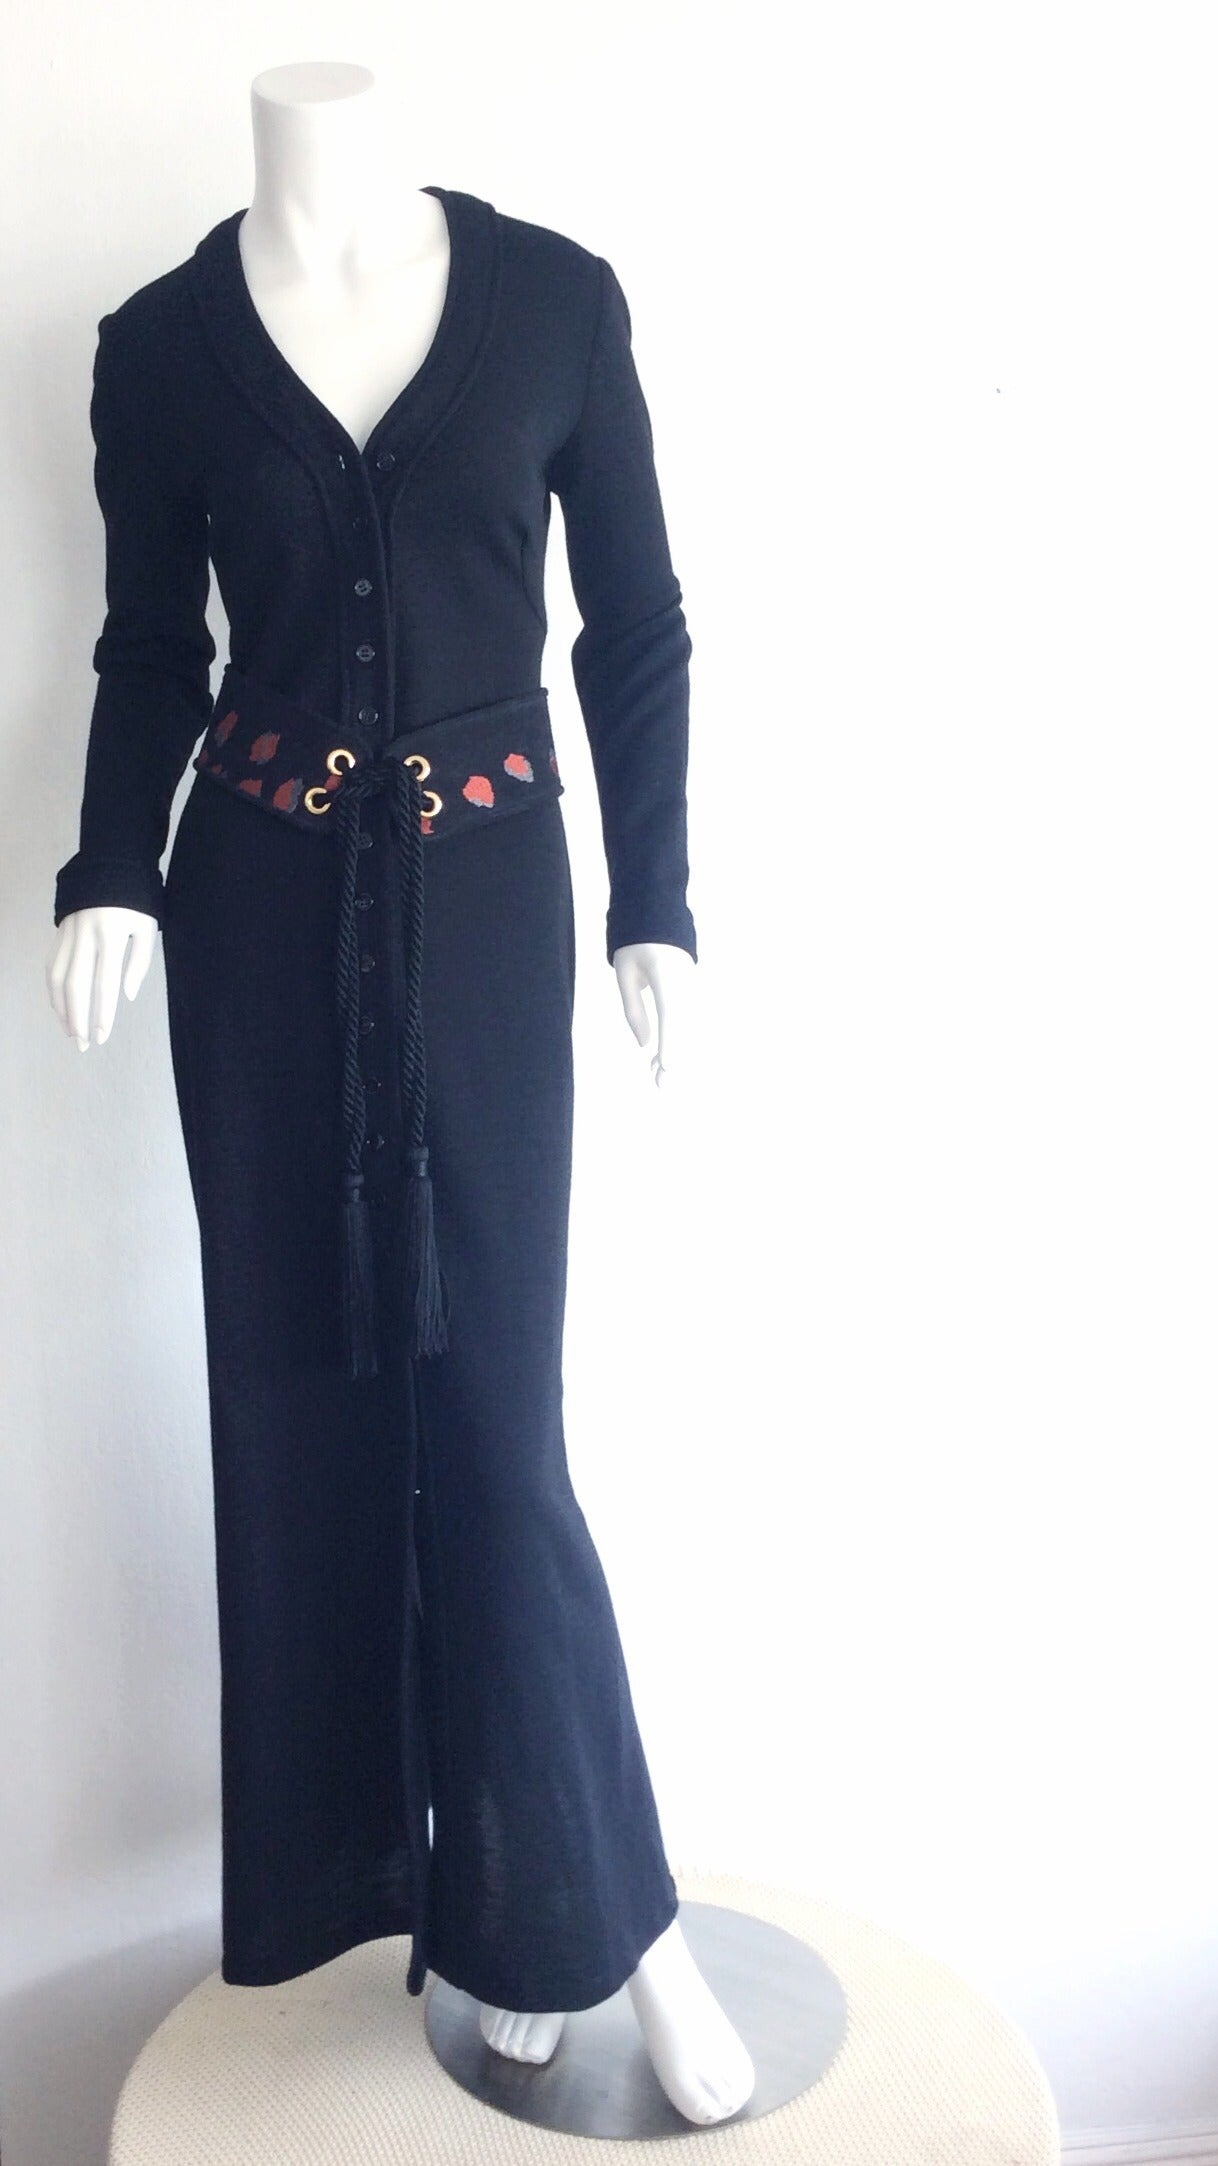 Beautiful vintage Mary Quant for Bonwit Teller black wool shirt dress! Features buttons up the entire front, which makes for an incredible figure flattering dress, or cardigan. A truly versatile piece that can be worn in so many ways. Mary Quant